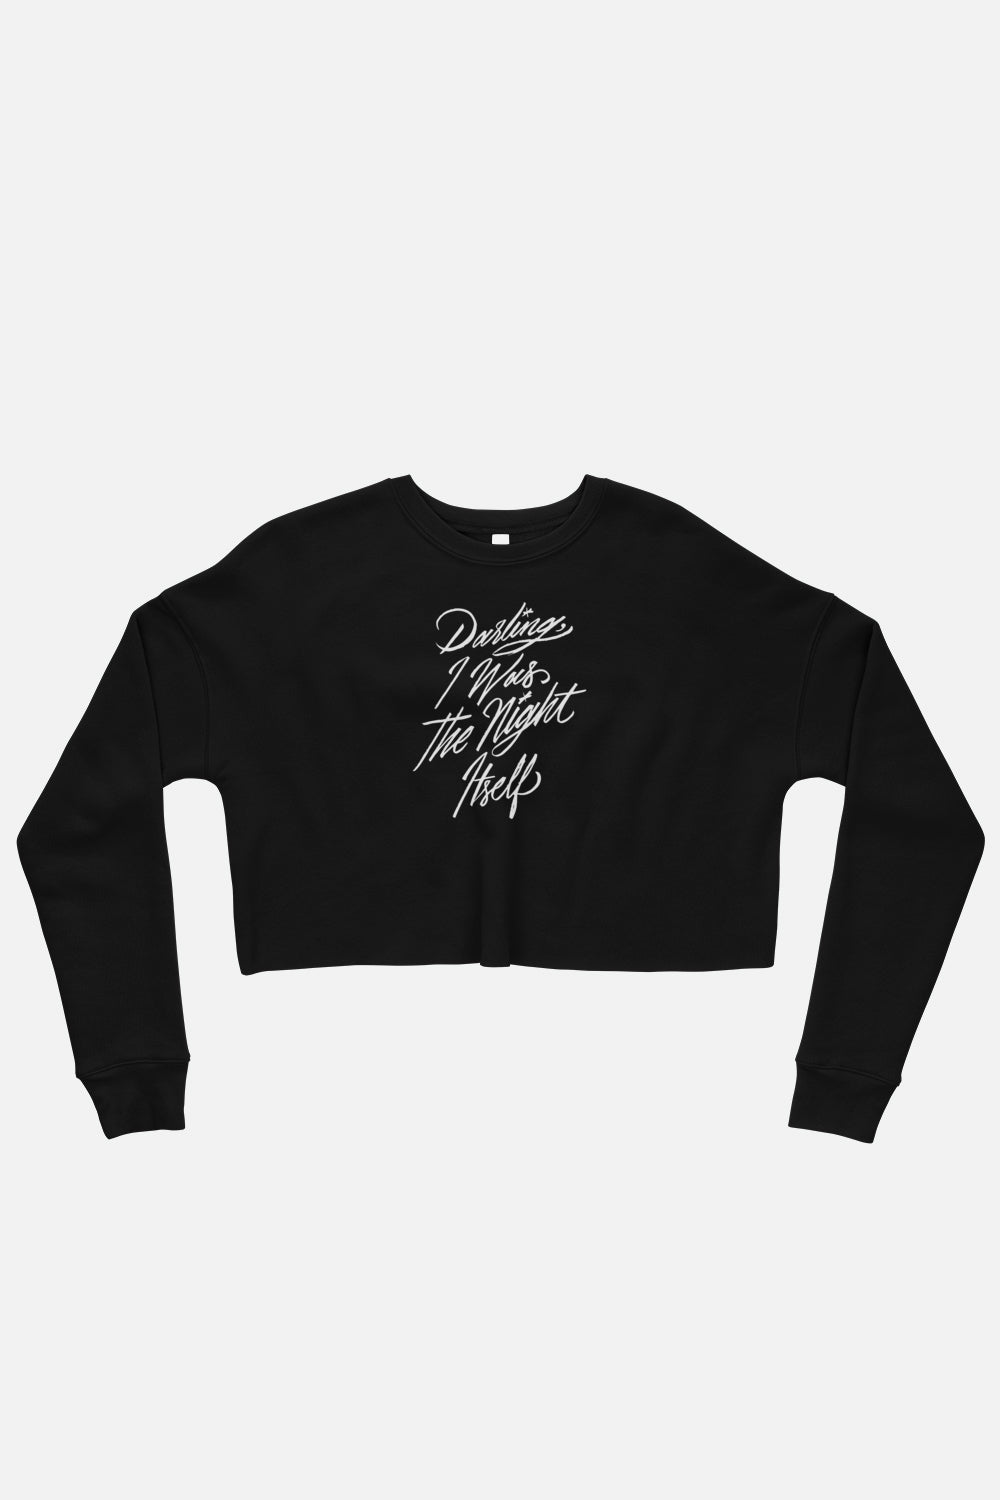 Darling, I Was the Night Itself Fitted Crop Sweatshirt | The Invisible Life of Addie LaRue